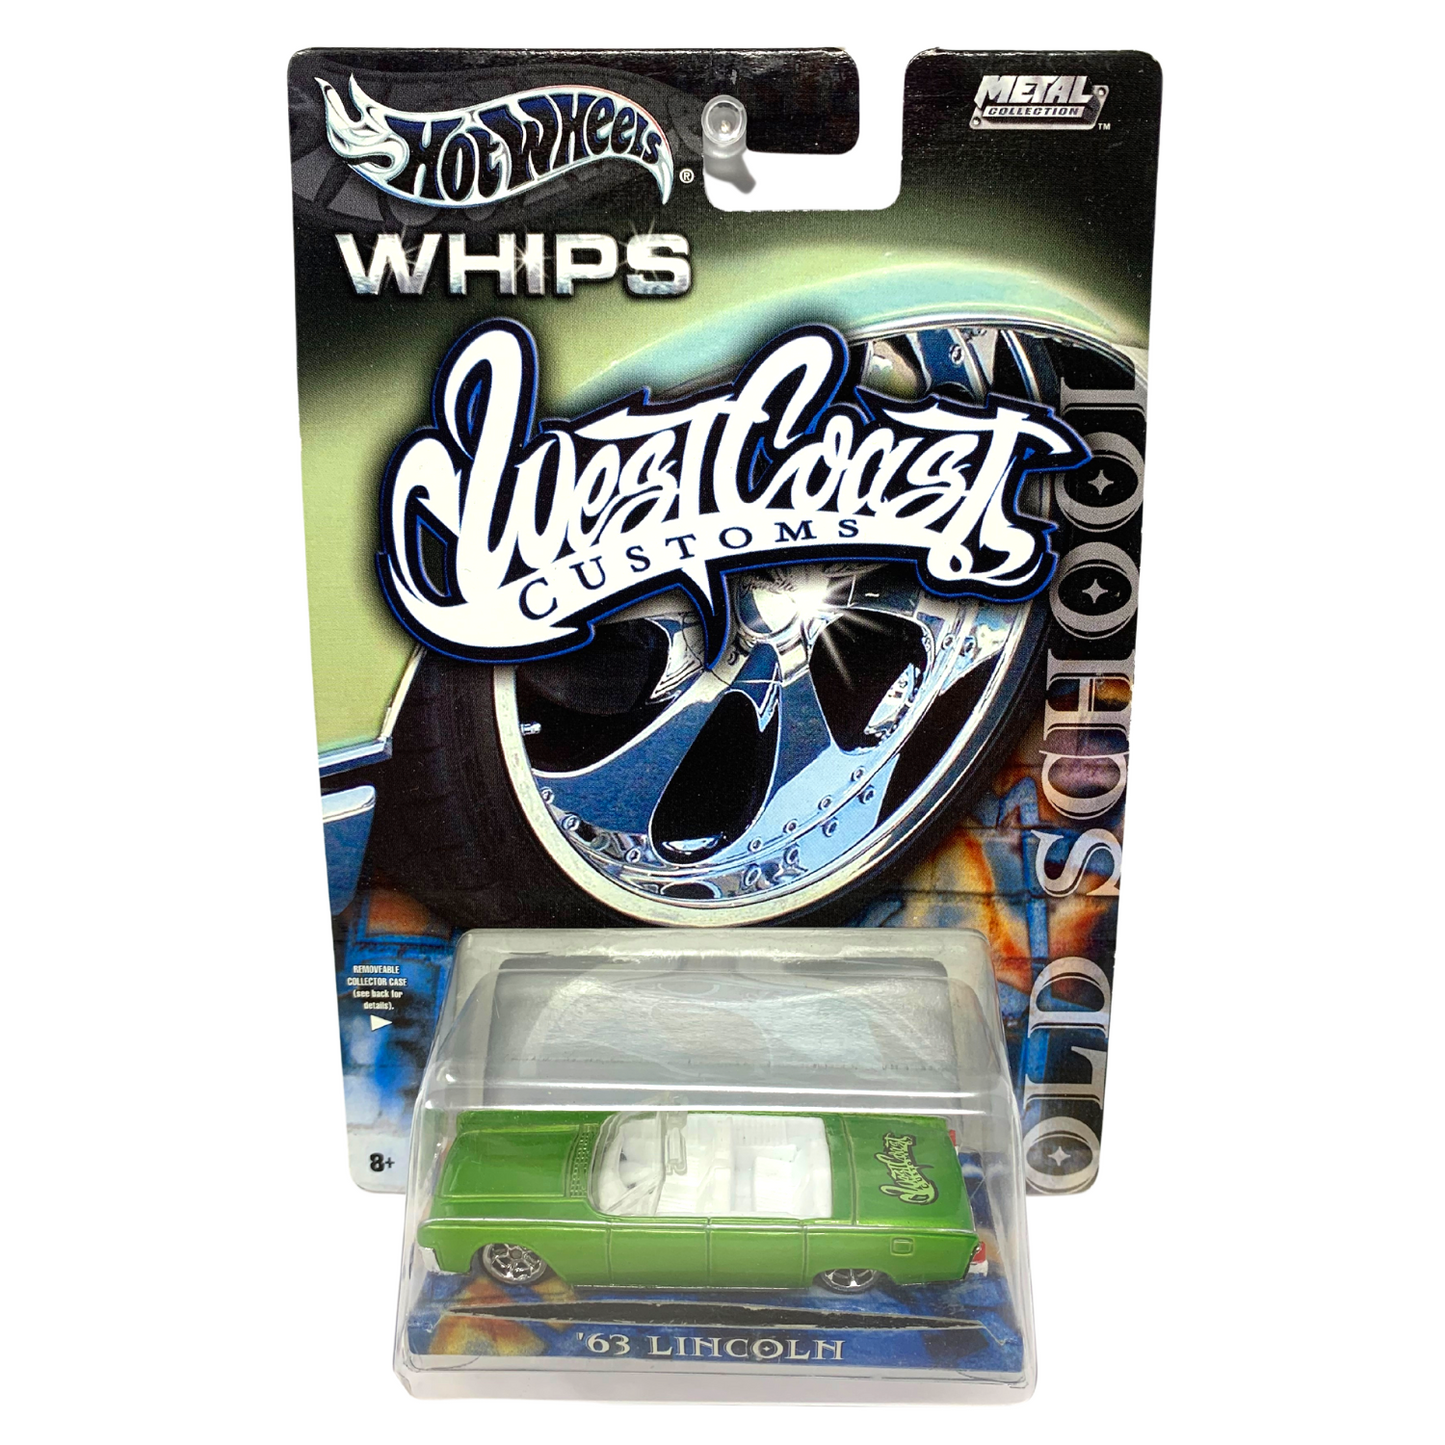 Hot Wheels Whips West Coast Customs Old School '63 Lincoln 1:64 Diecast